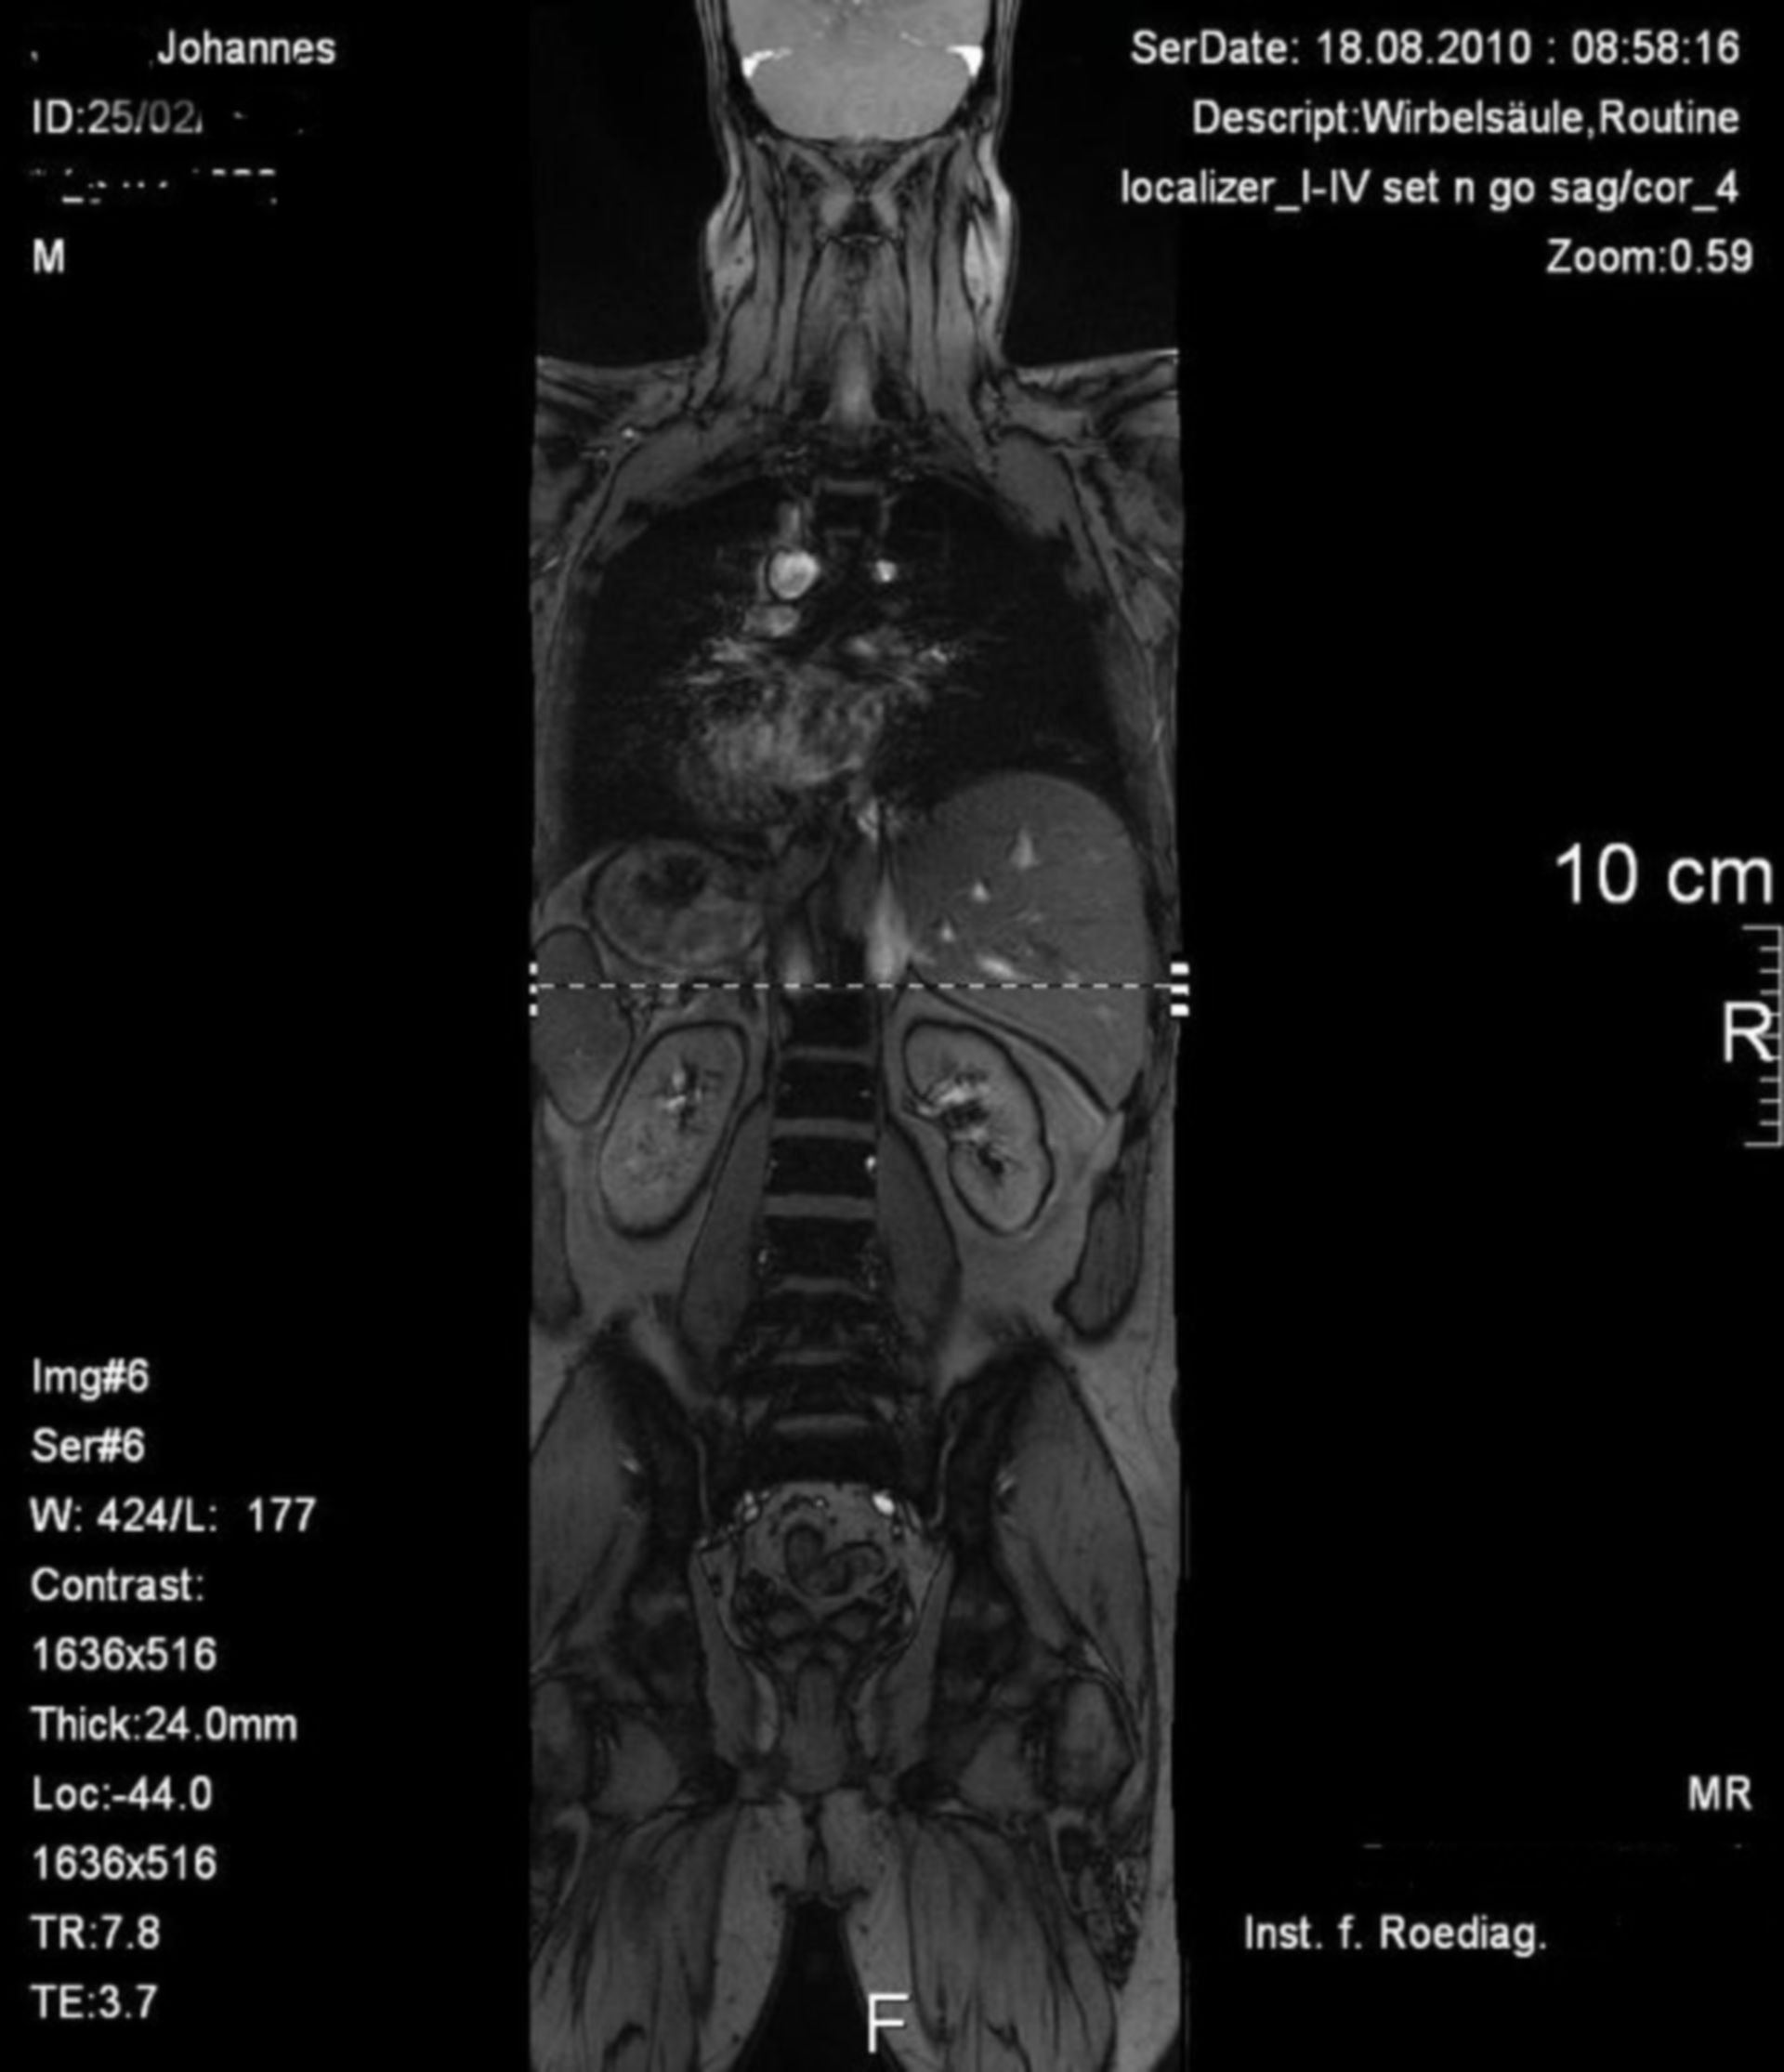 MRI Overview Image